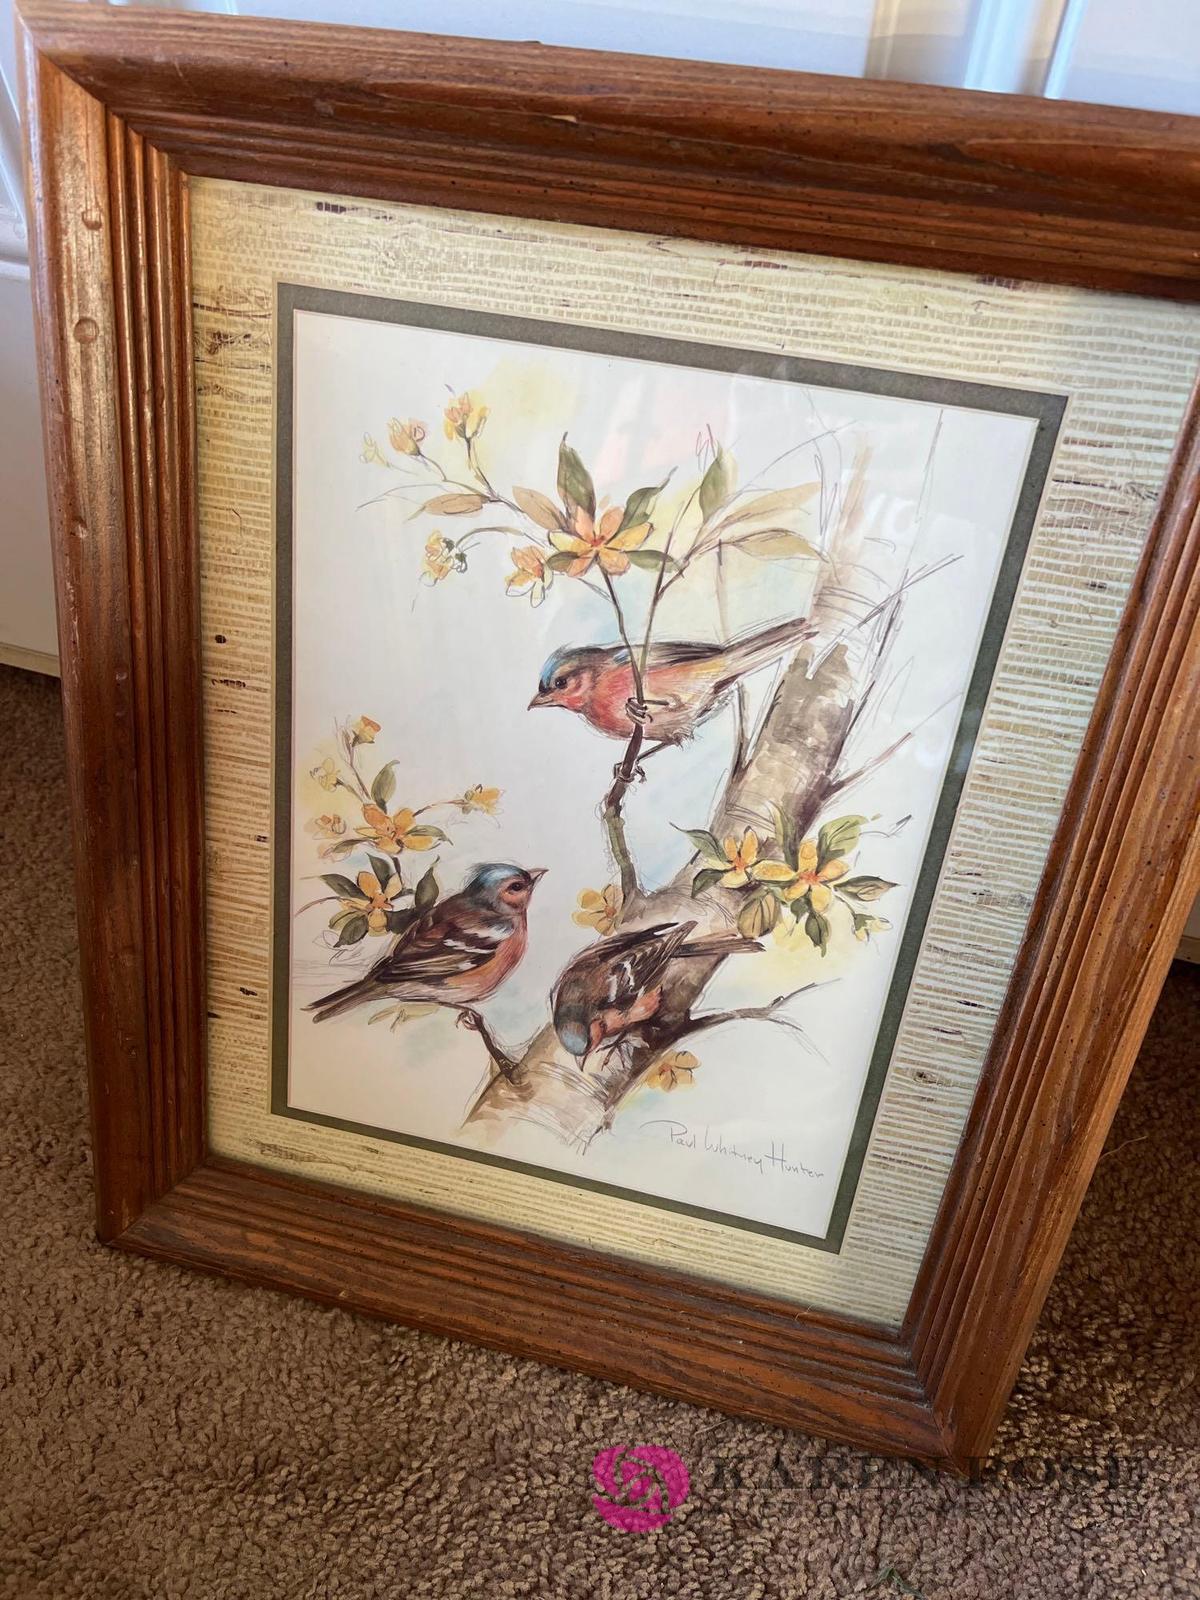 Framed bird picture by Paul Whitney Hunter